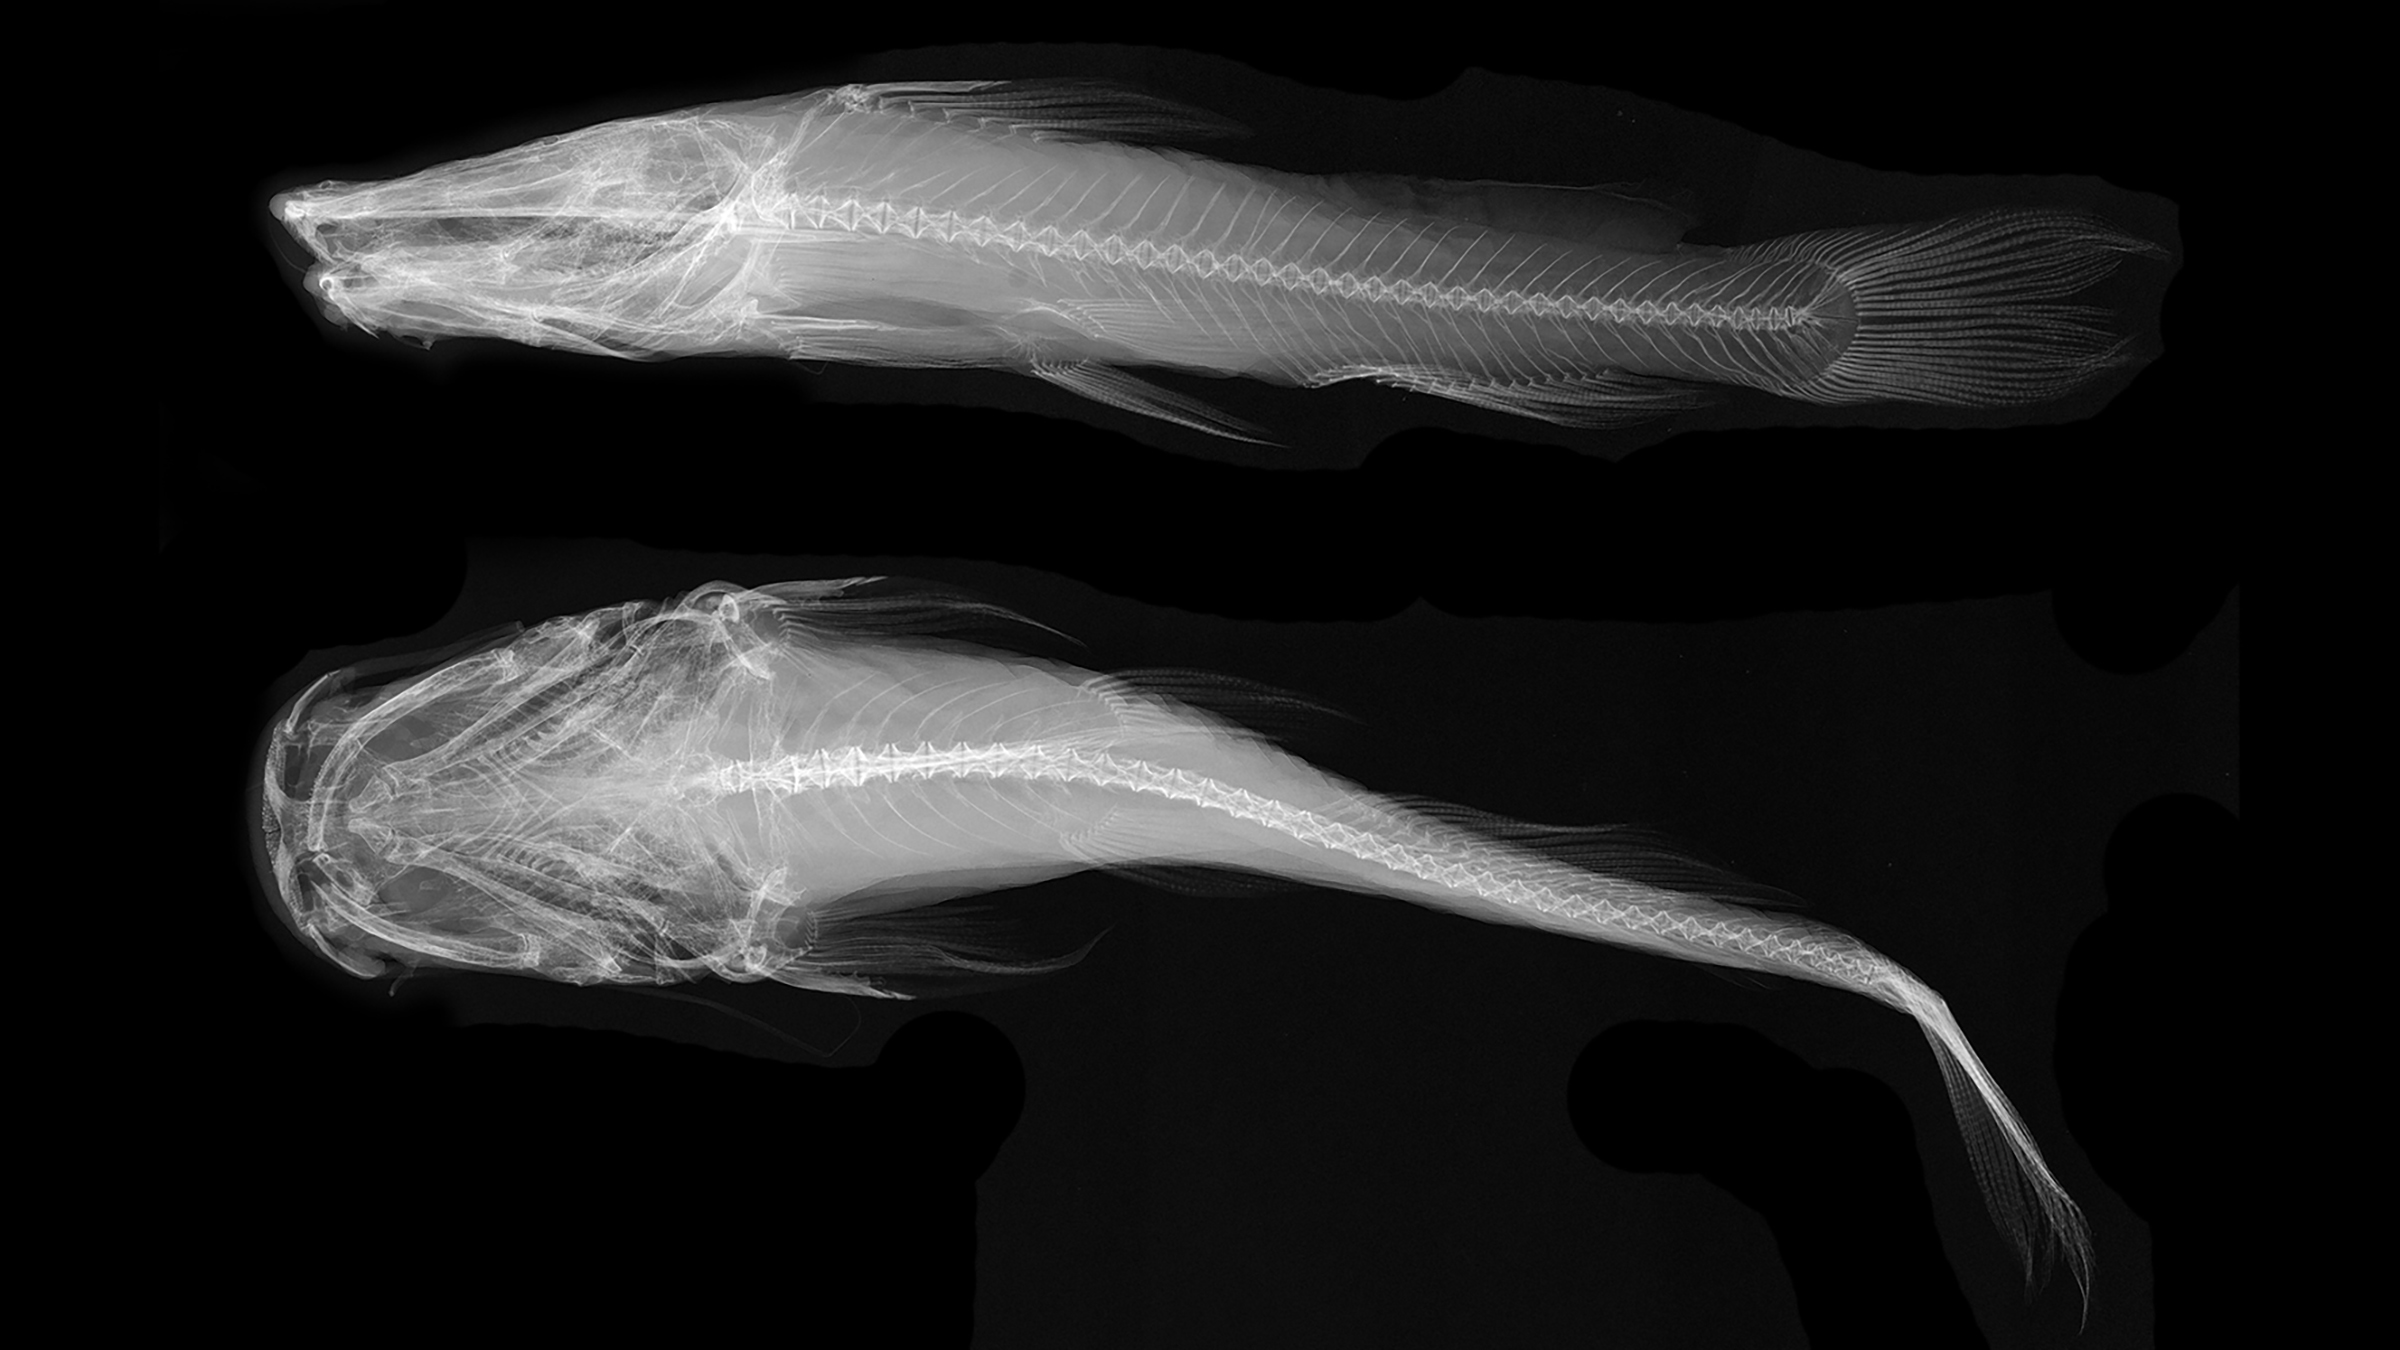 X-ray image of a fish from above and from the side